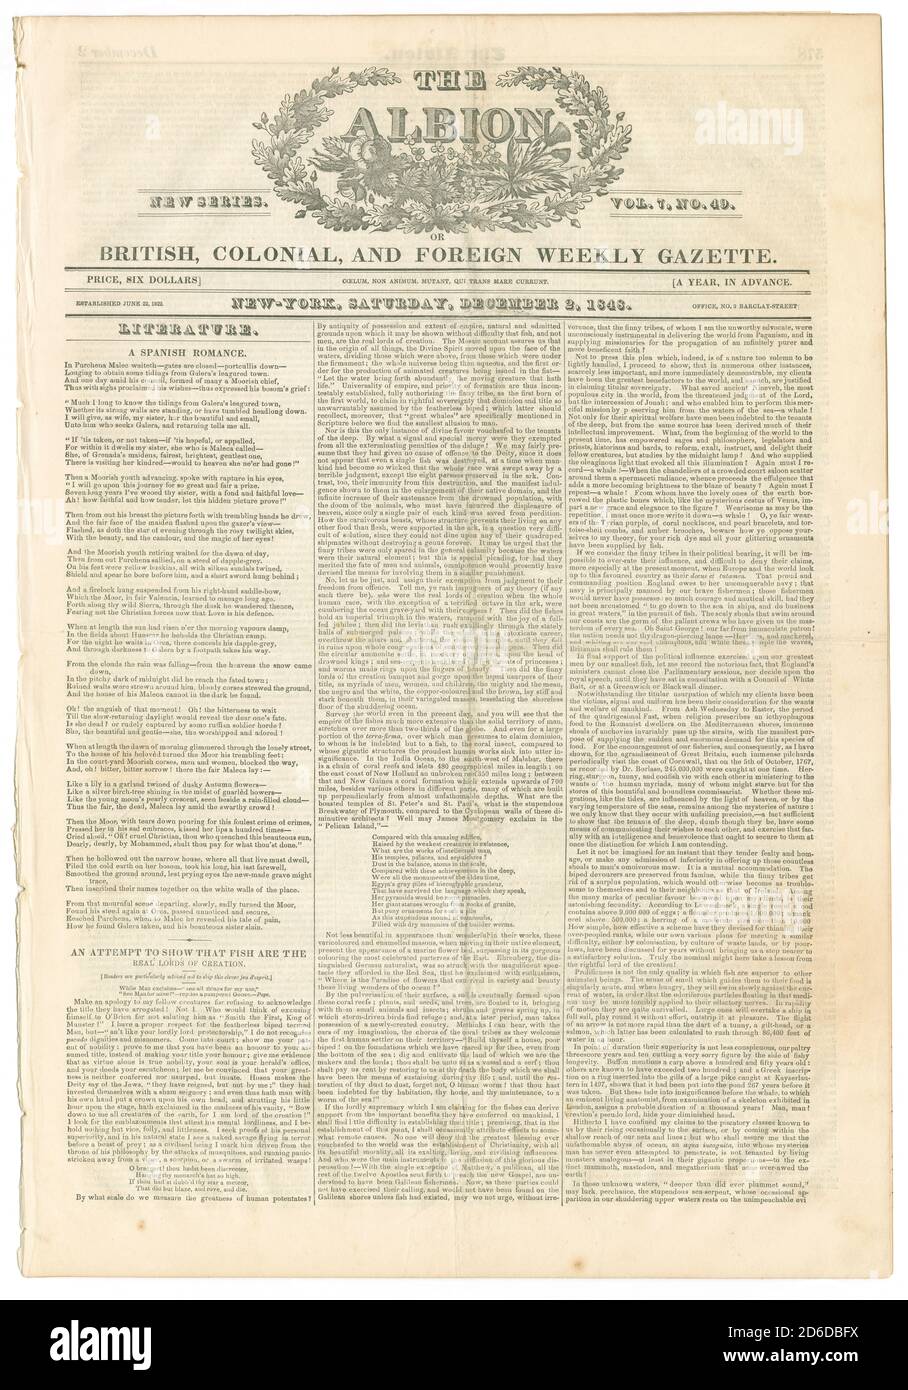 Antique newspaper, front cover of The Albion (New York) from December 2, 1848. British, Colonial, and Foreign Weekly Gazette. Front page articles are a poem “A Spanish Romance” and a “clever jeu d’esprit” titled “An Attempt to Show that Fish are the Real Lords of Creation.” SOURCE: ORIGINAL ENGRAVING Stock Photo